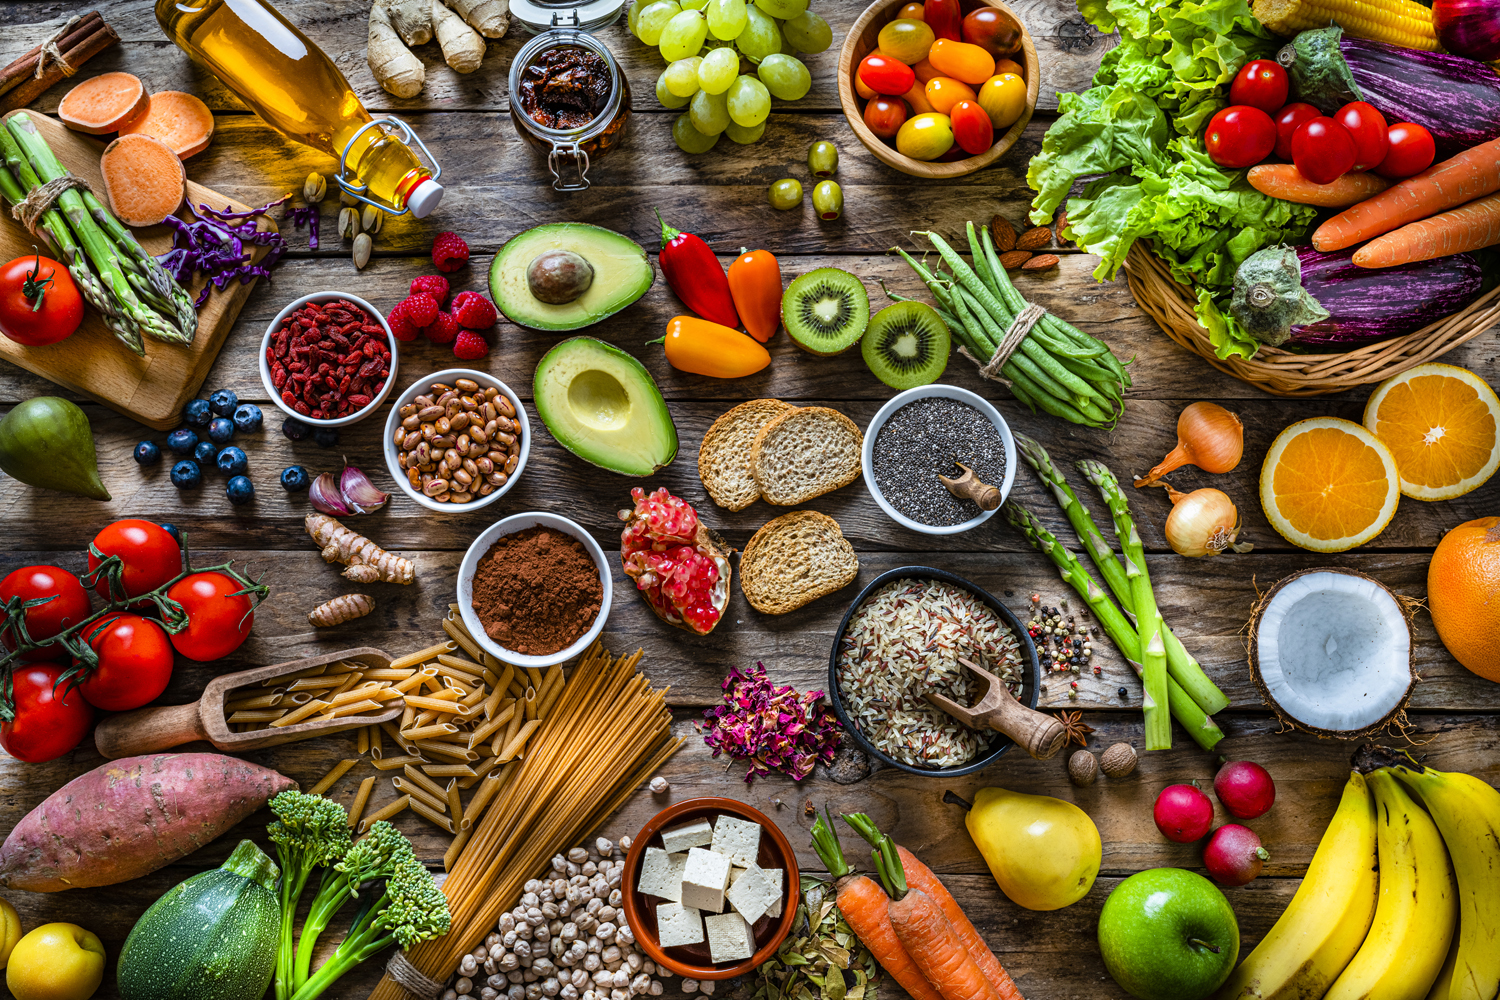 A bird's-eye view of healthy foods on a table.